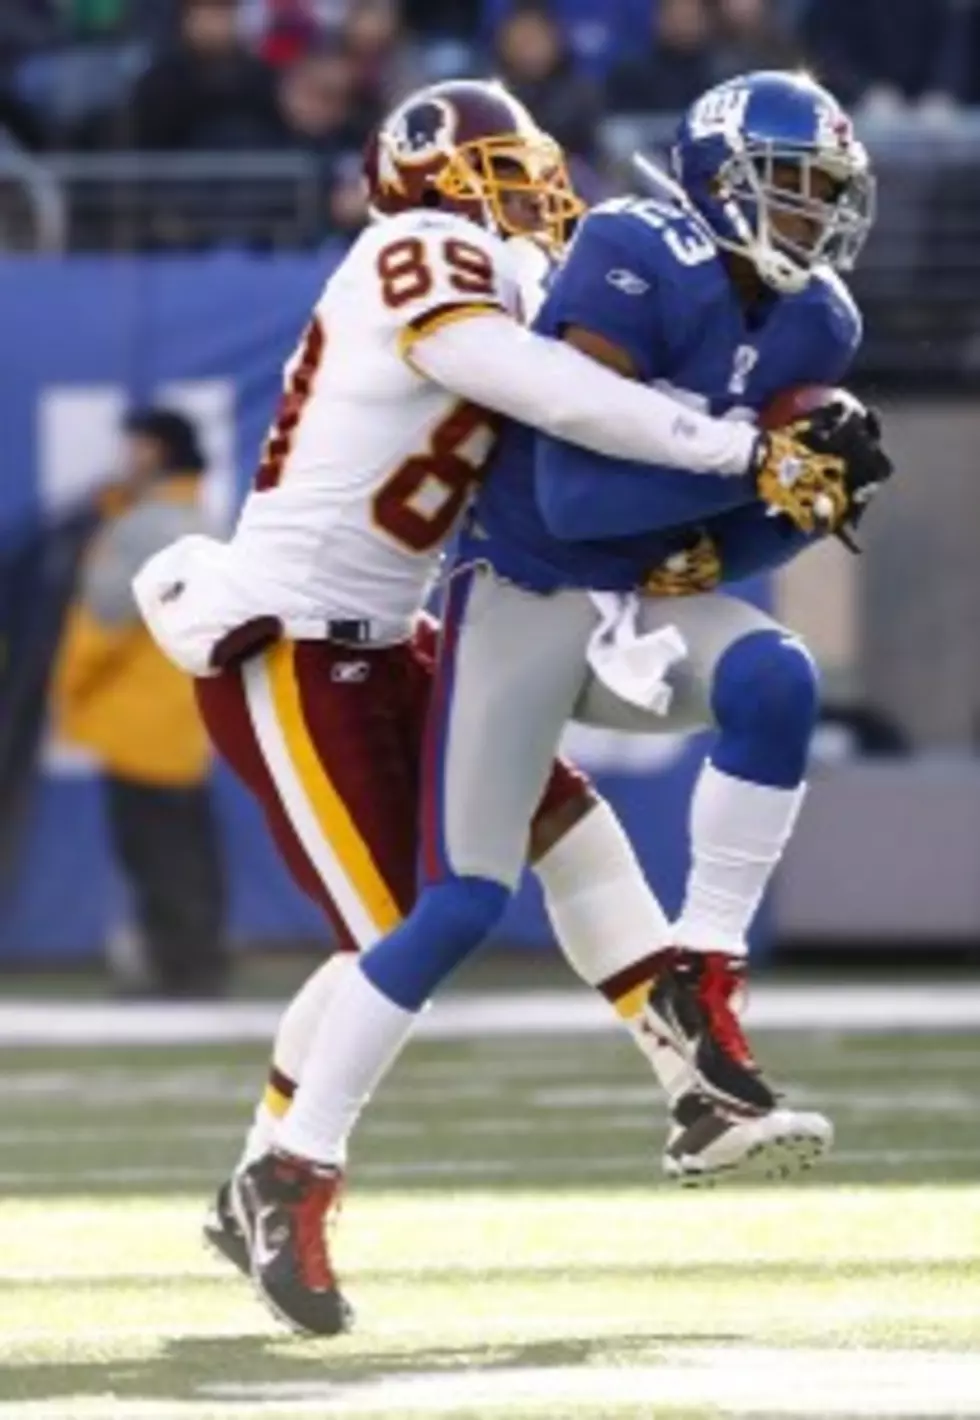 Diary of a Giants Fan: I Hate the Giants, They Lose to Redskins &#8211; Grades